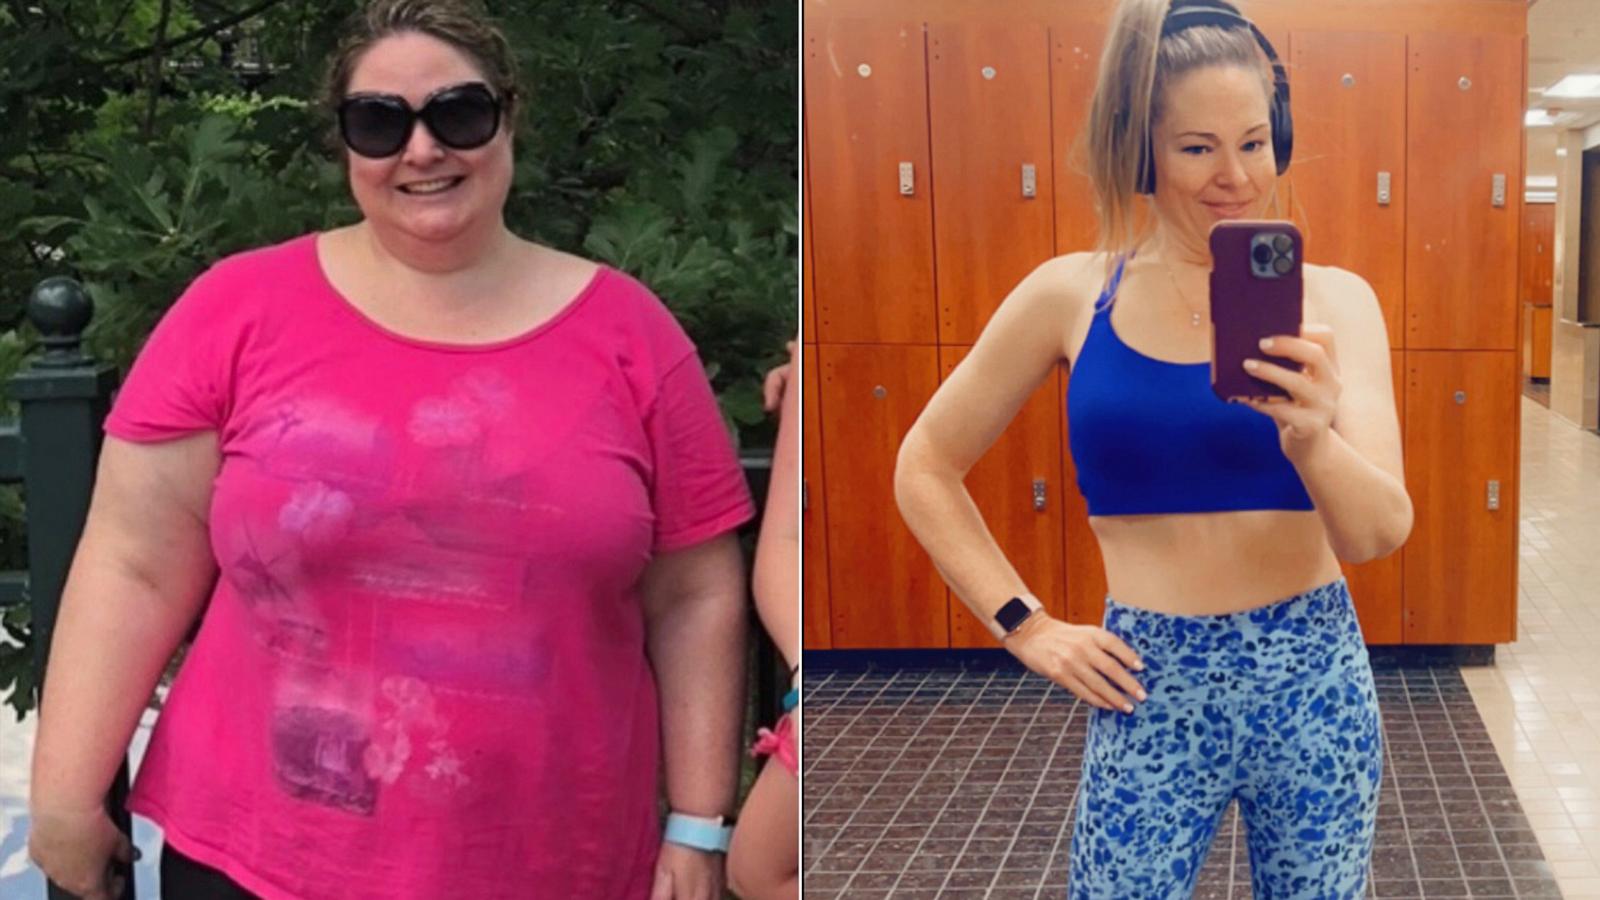 How one woman lost nearly 160 pounds in 1 year - ABC News